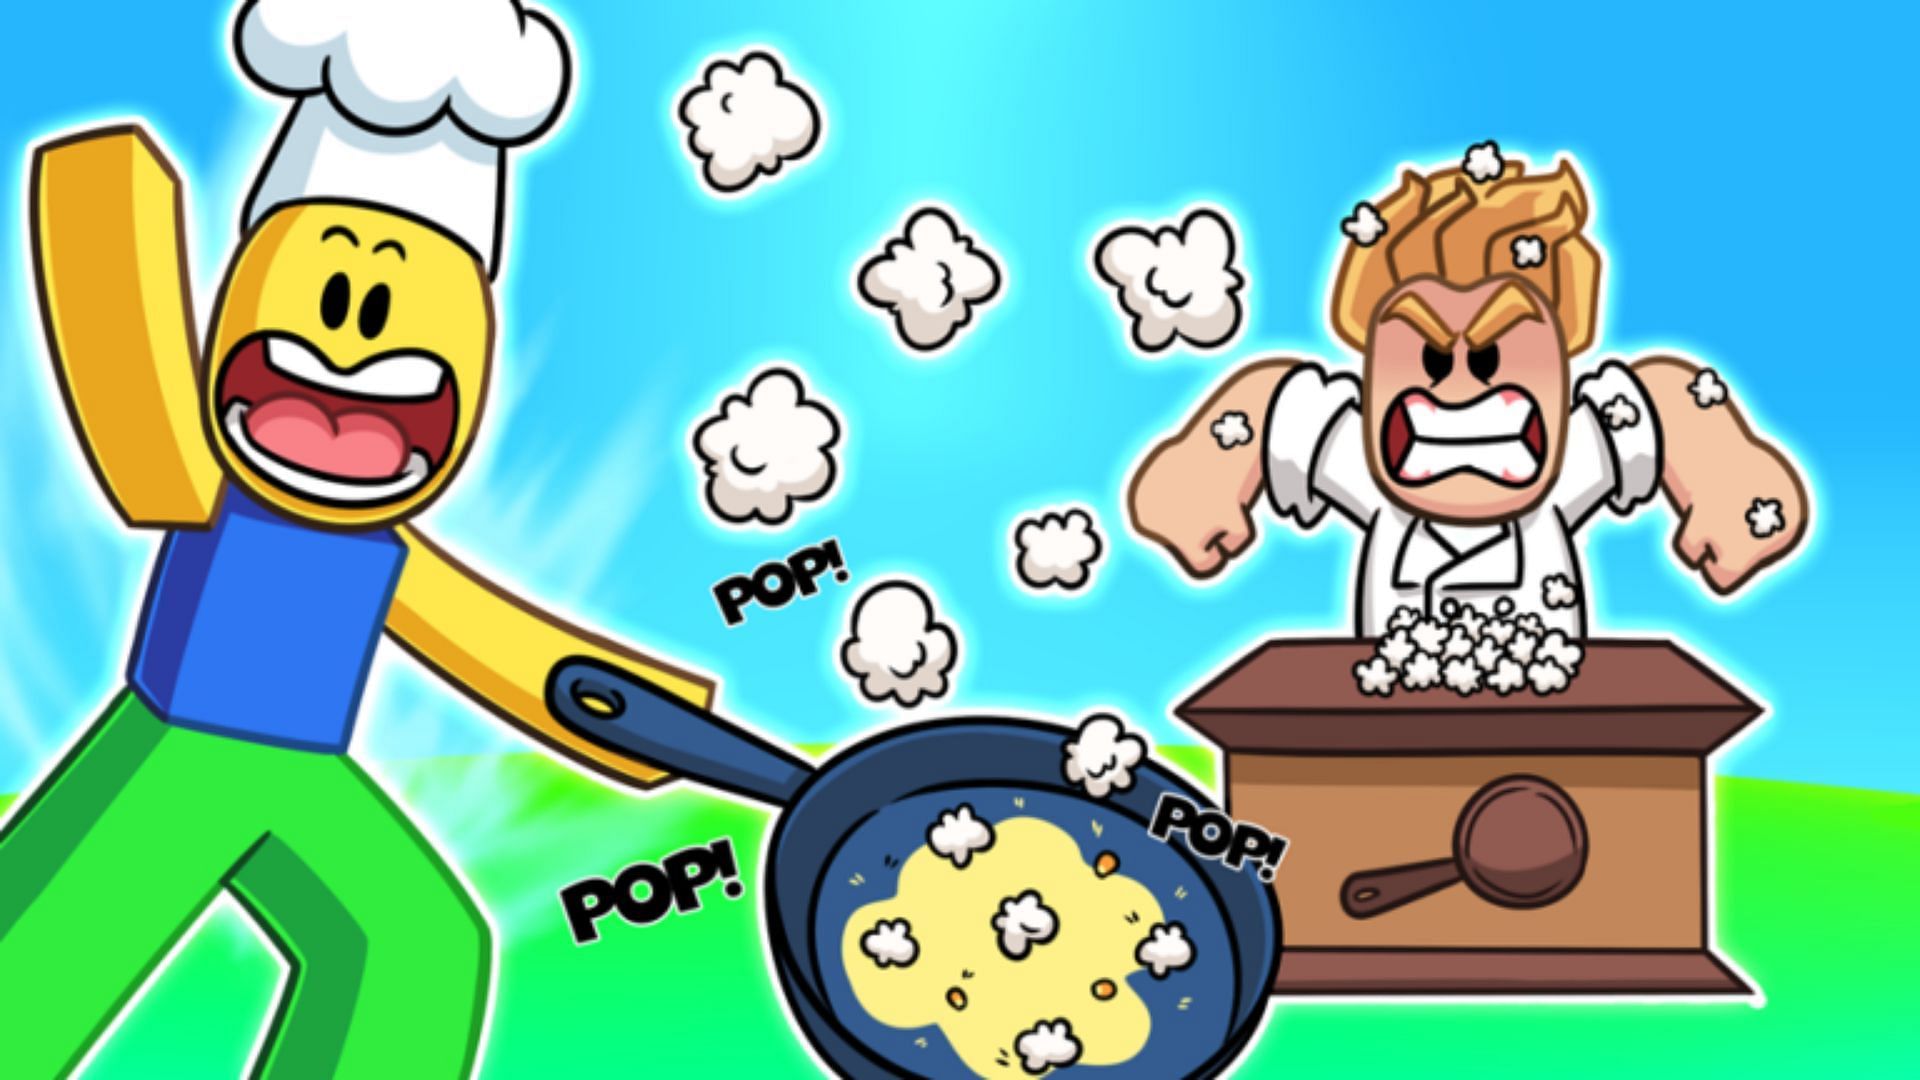 Codes for Popcorn Simulator and their importance (Image via Roblox)